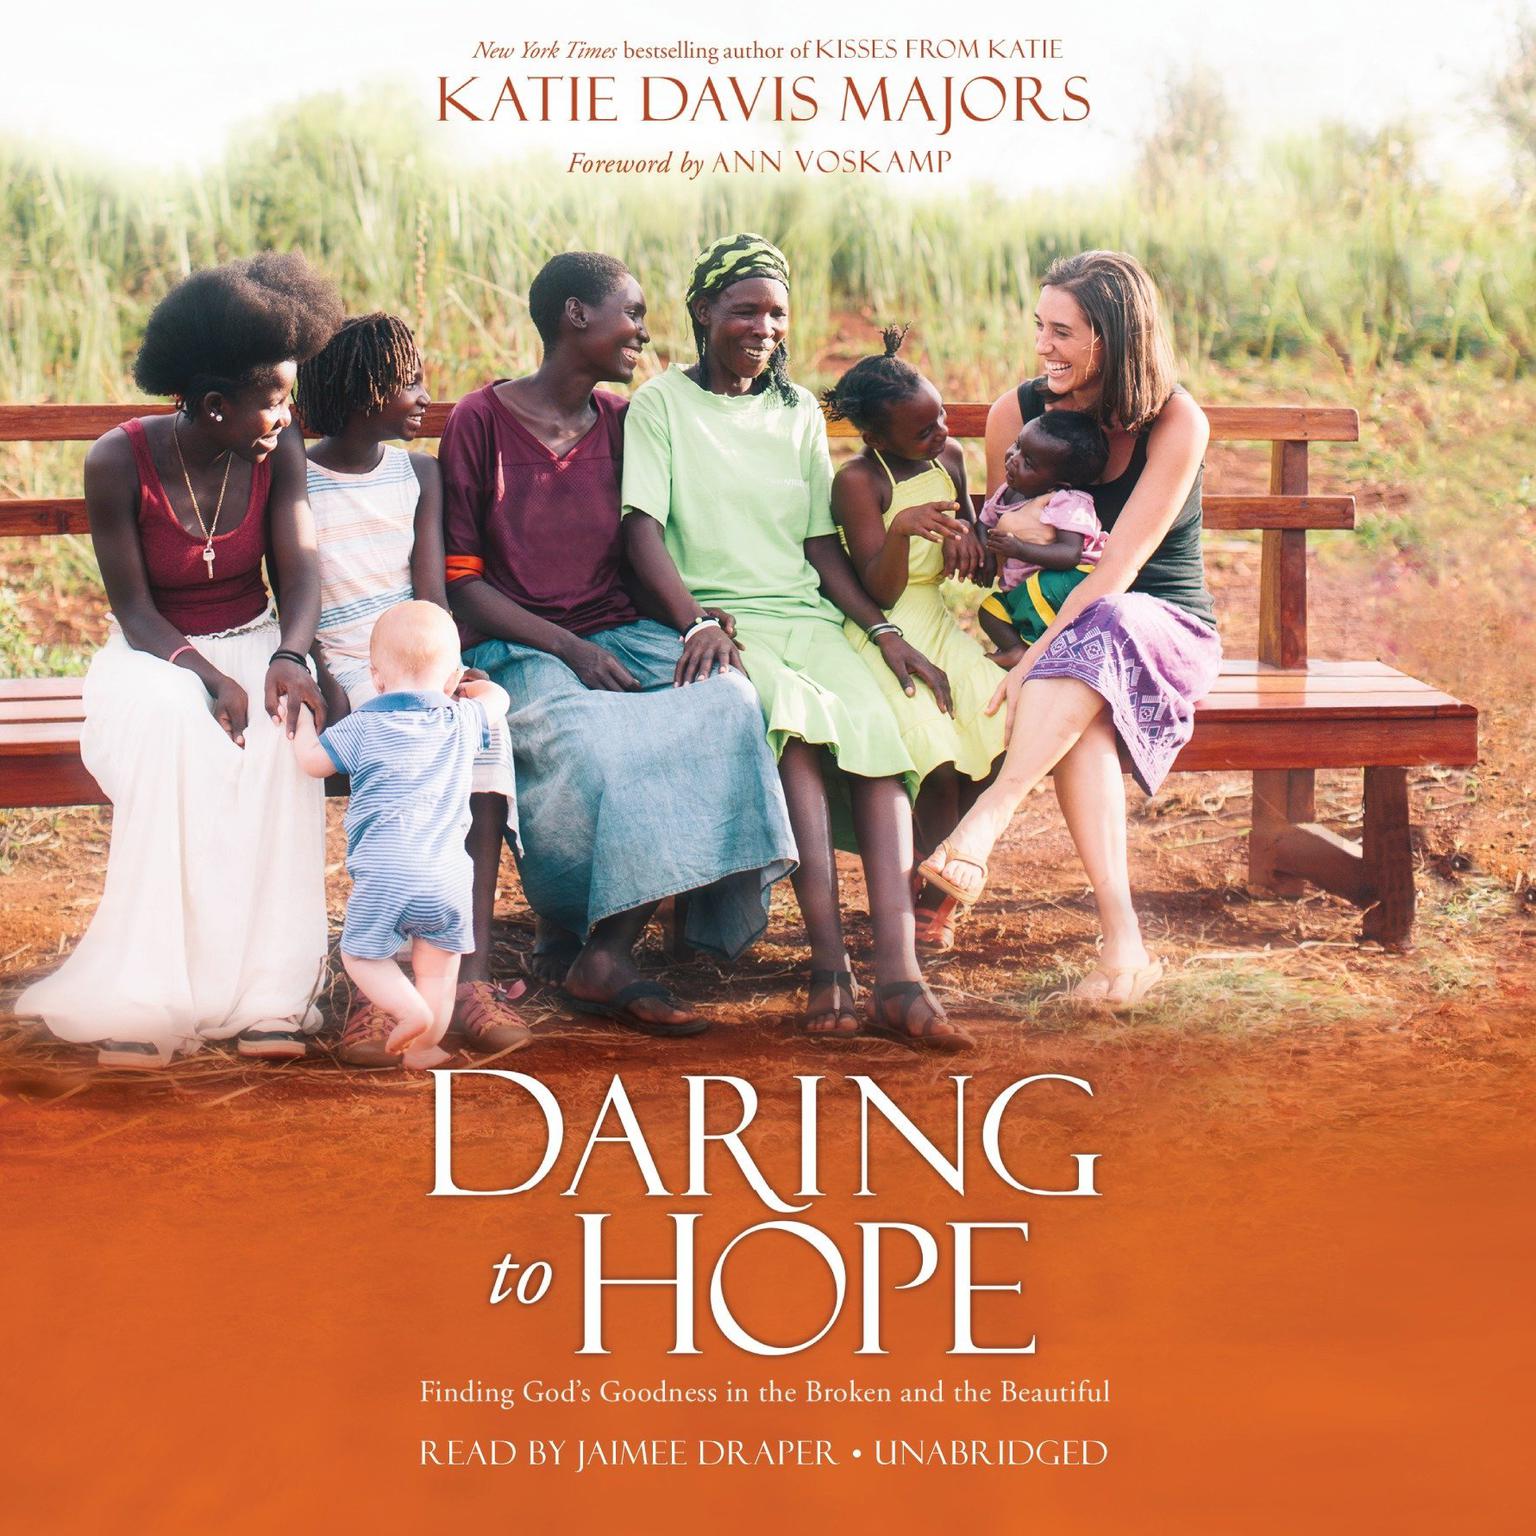 Daring to Hope: Finding Gods Goodness in the Broken and the Beautiful Audiobook, by Katie Davis Majors